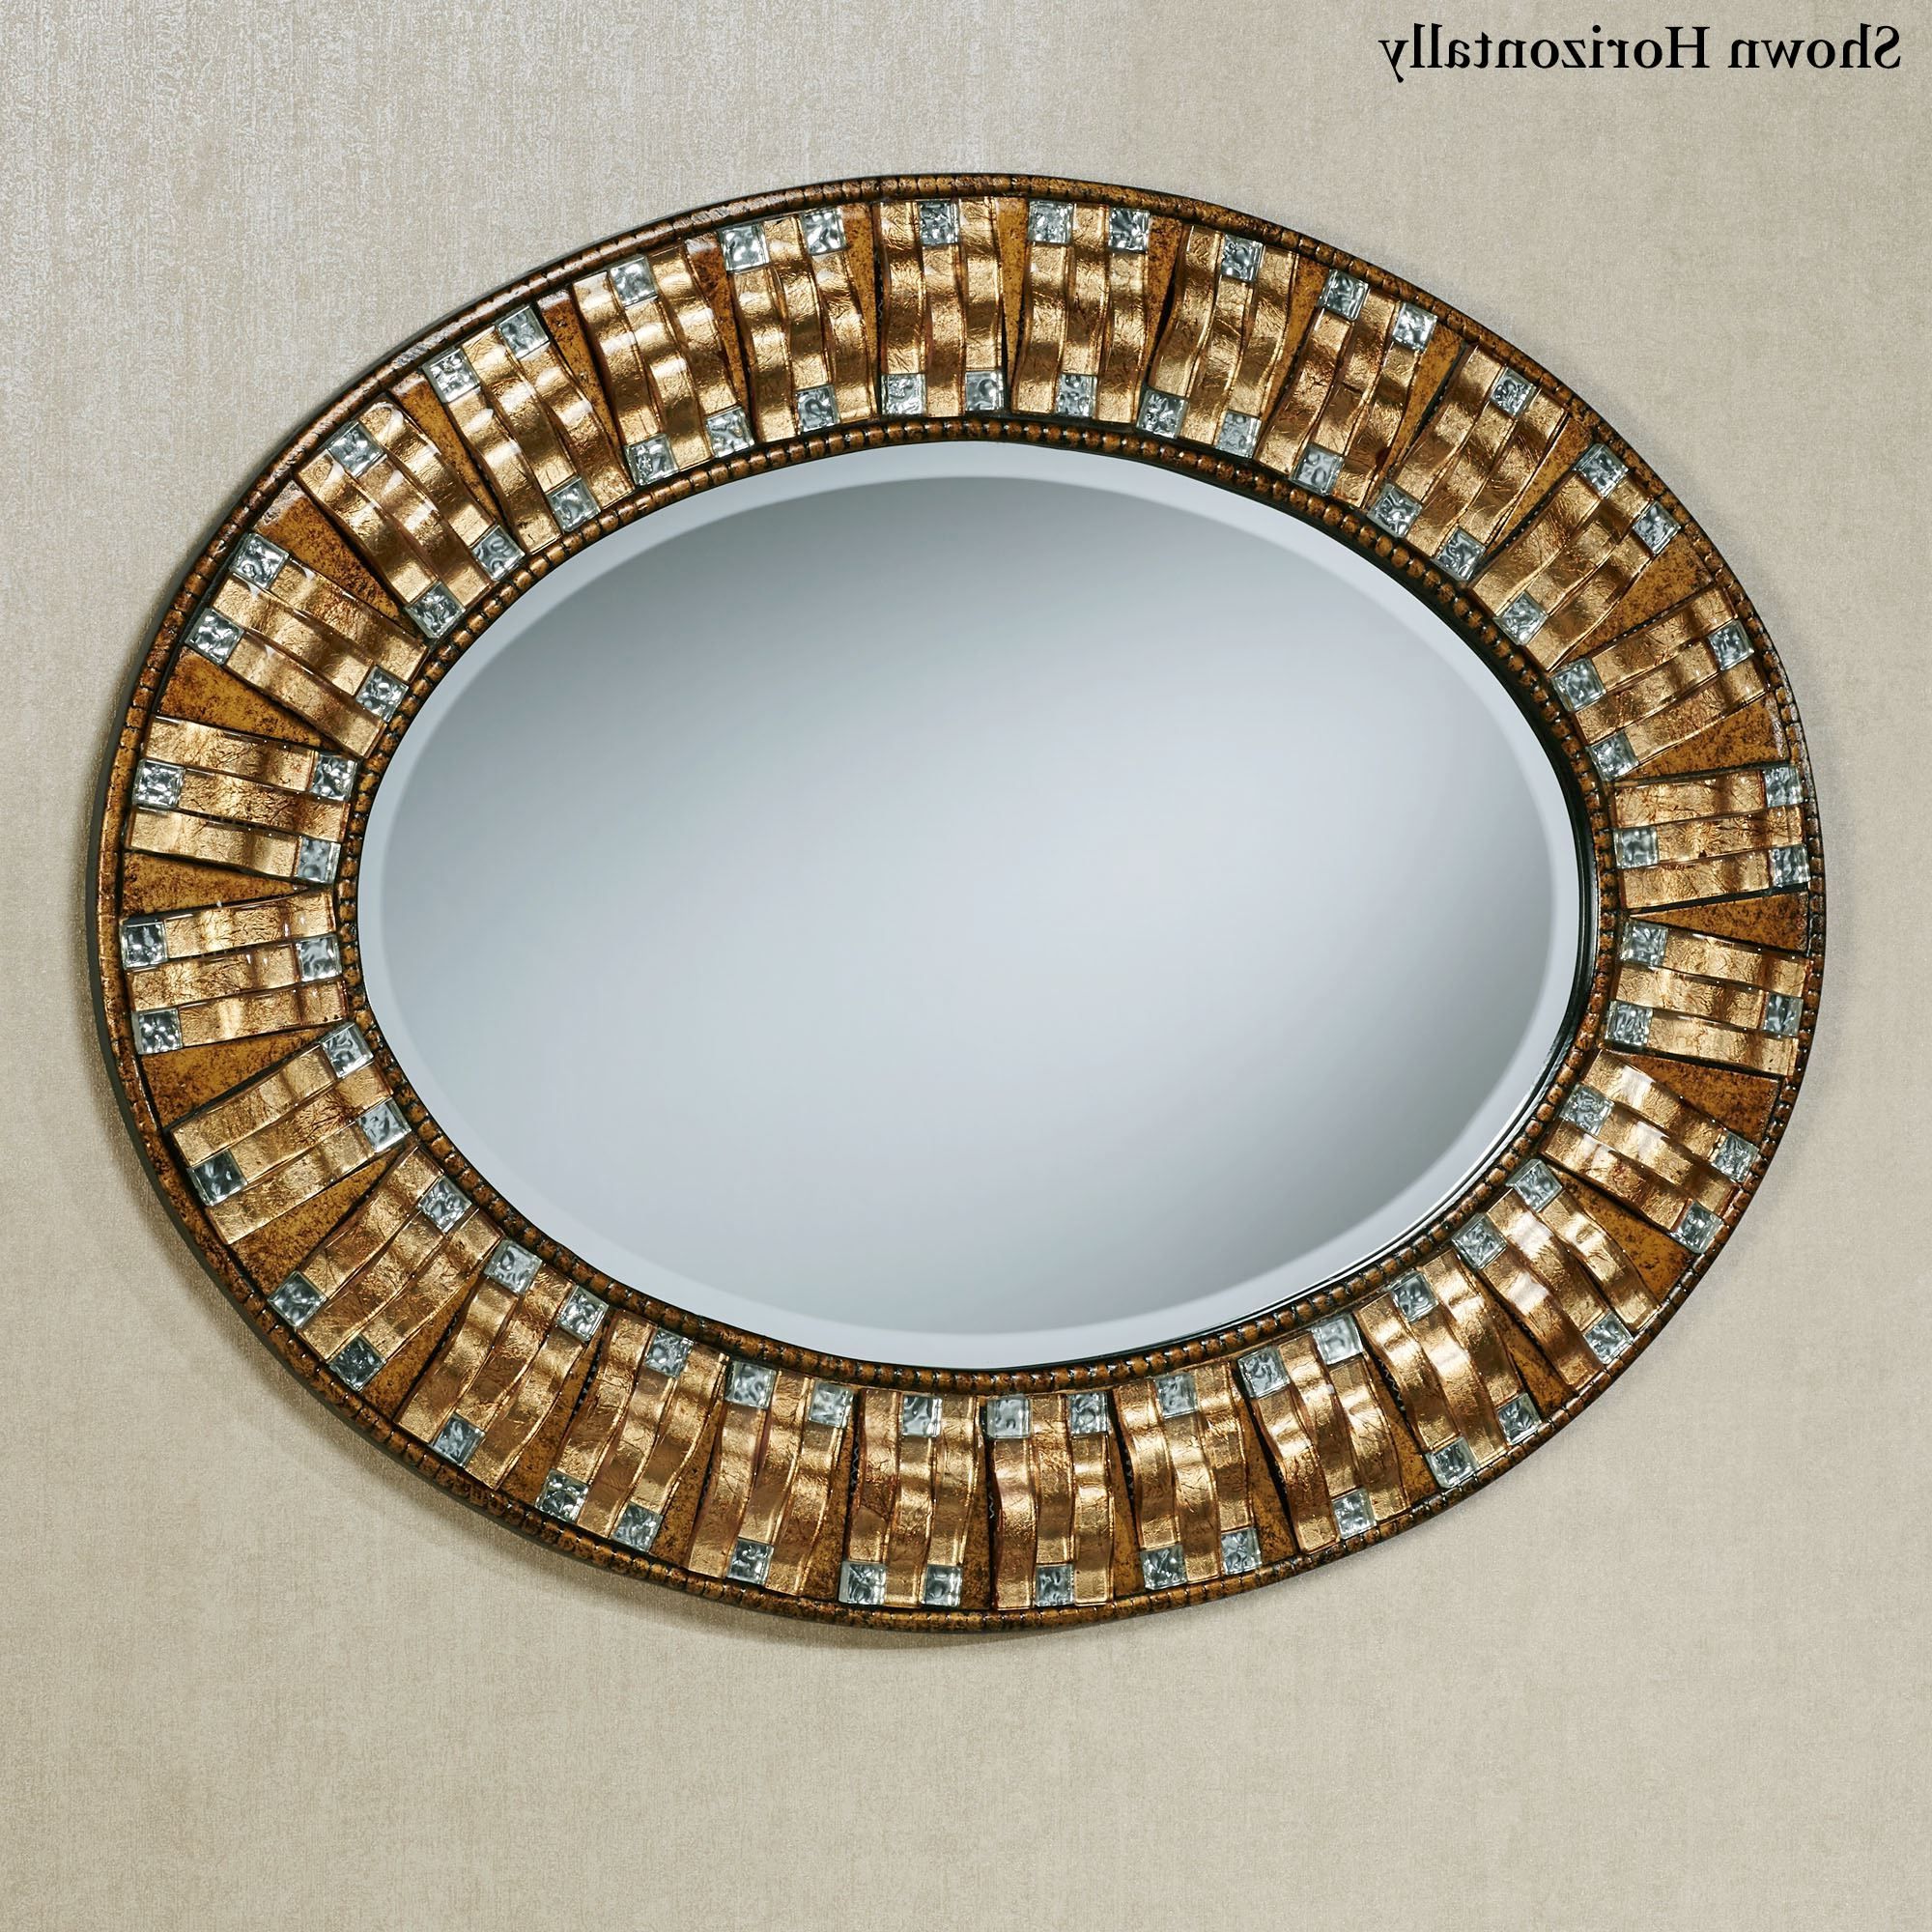 Well Known Mosaic Oval Wall Mirrors Regarding Maybelle Mosaic Oval Wall Mirror (View 6 of 15)